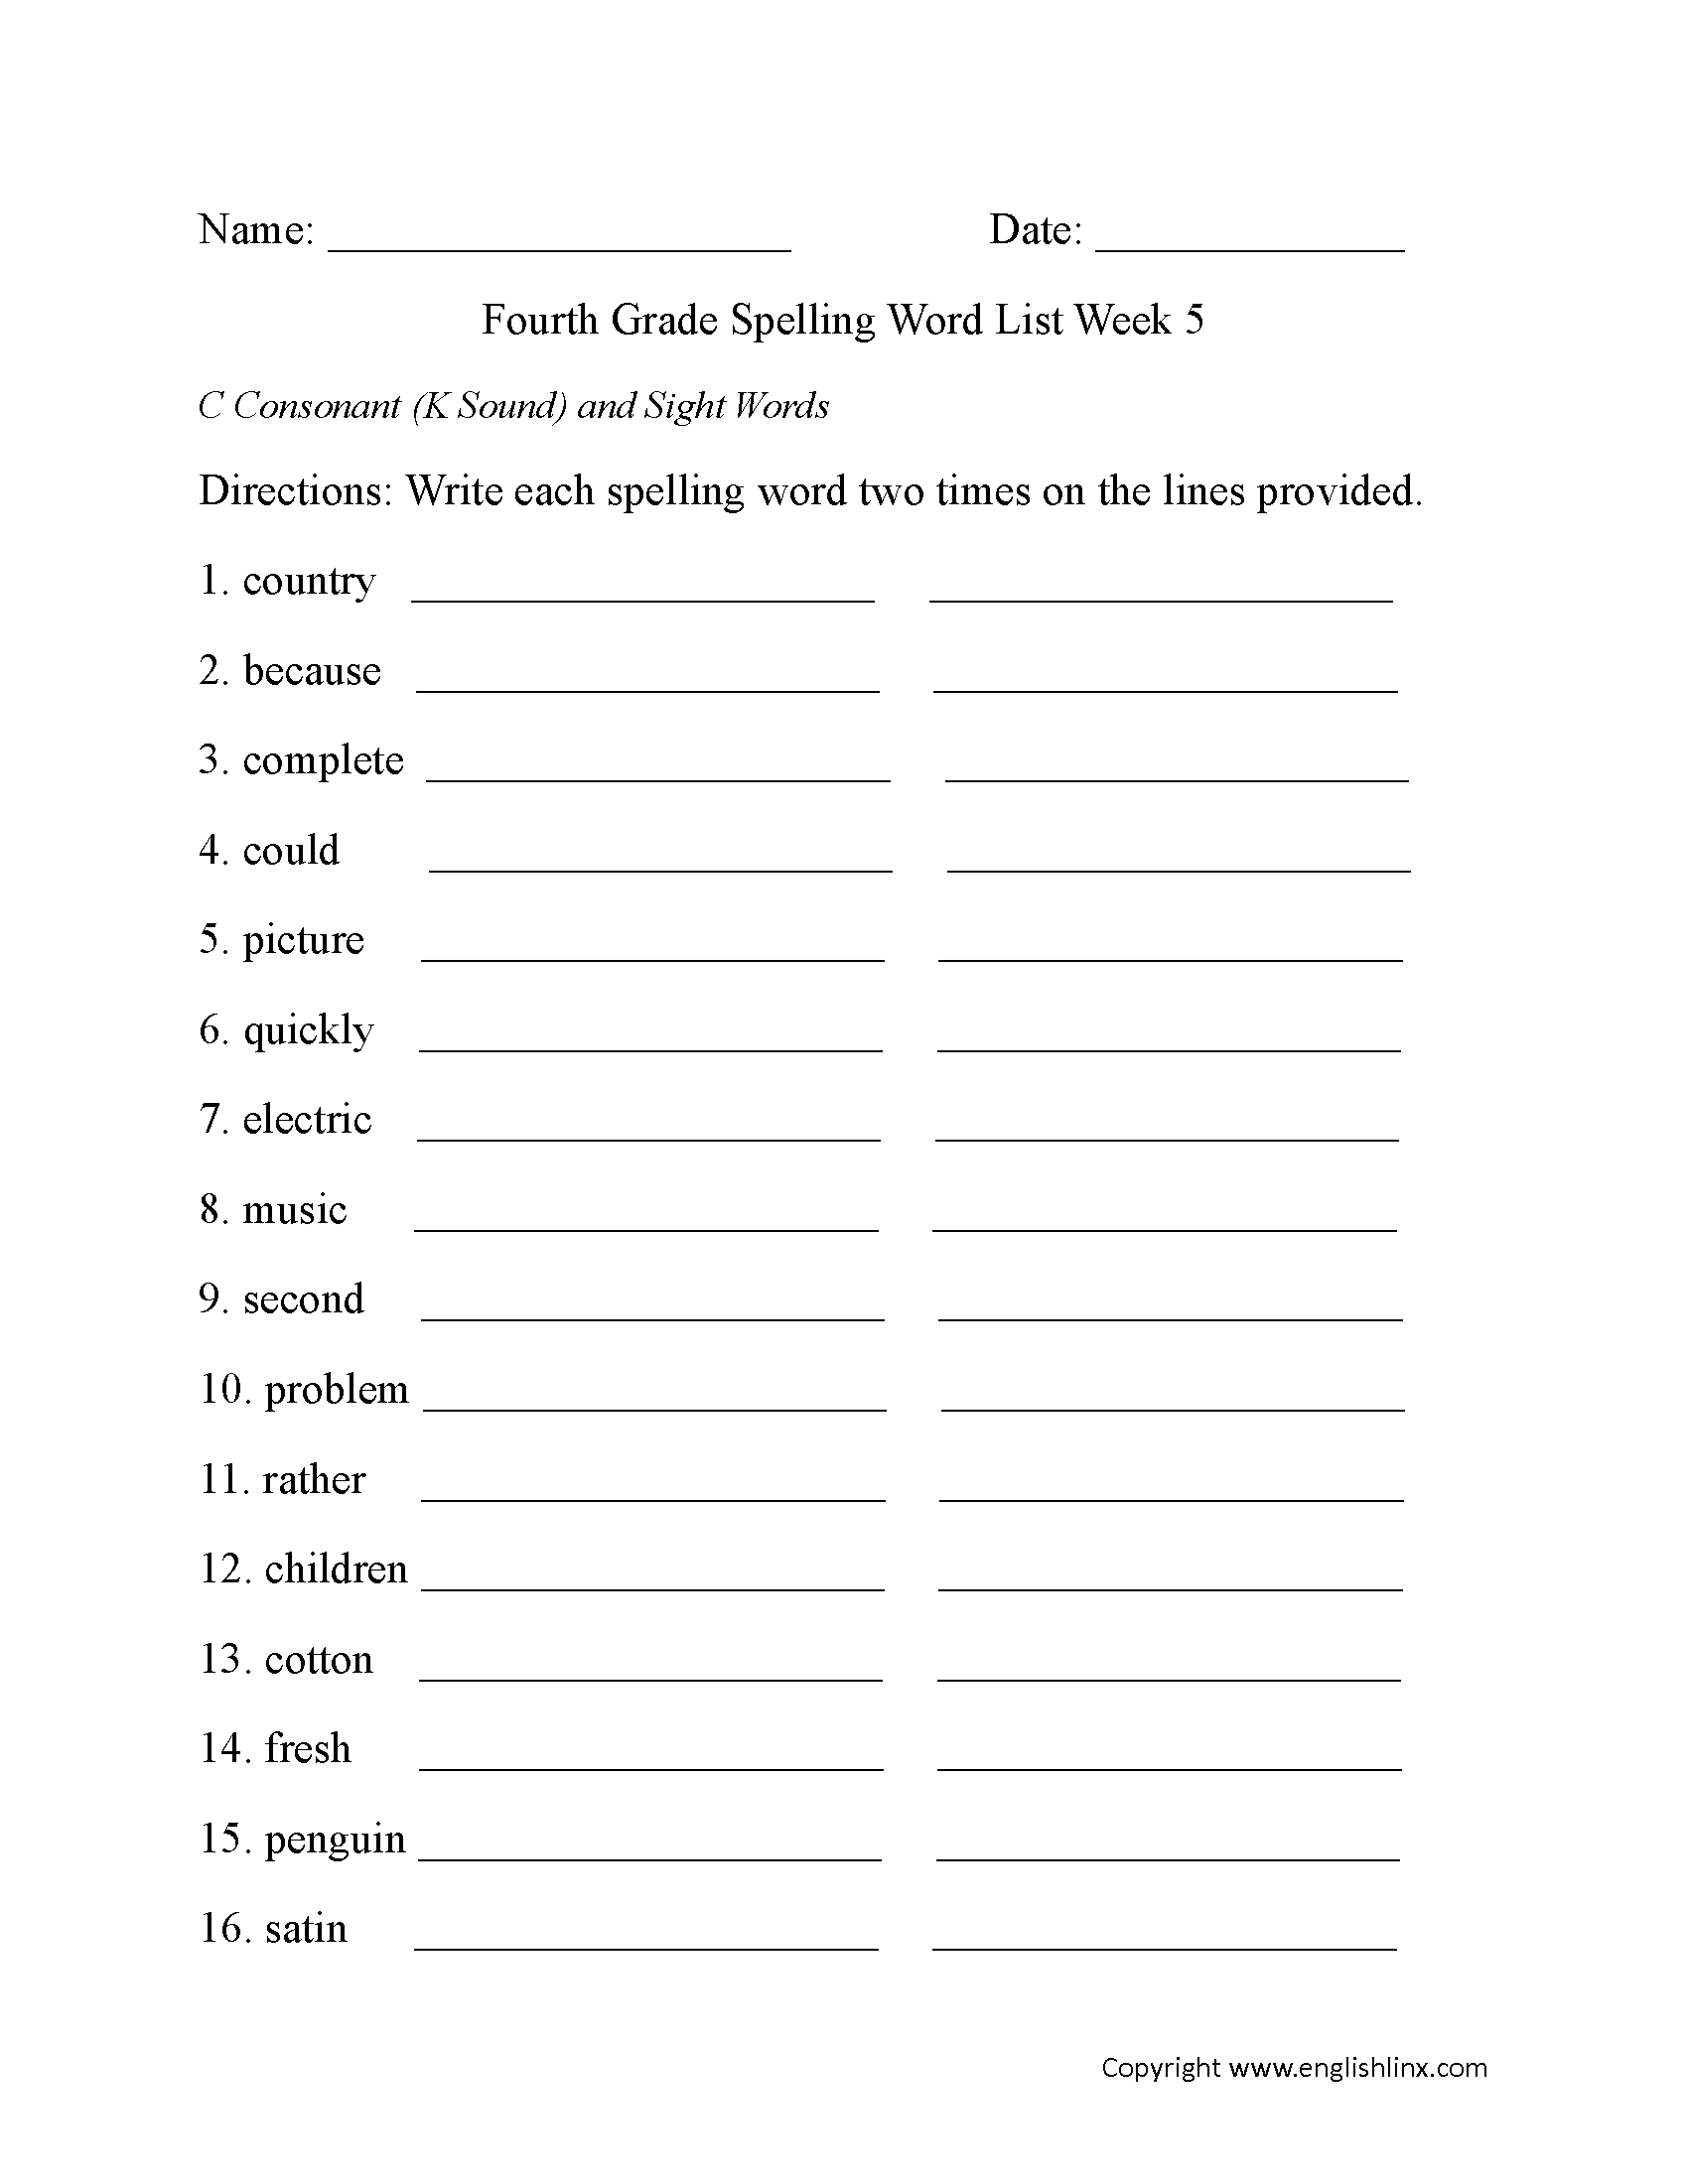 Week 5 C Consonant and Sight Words Fourth Grade Spelling Words Worksheets